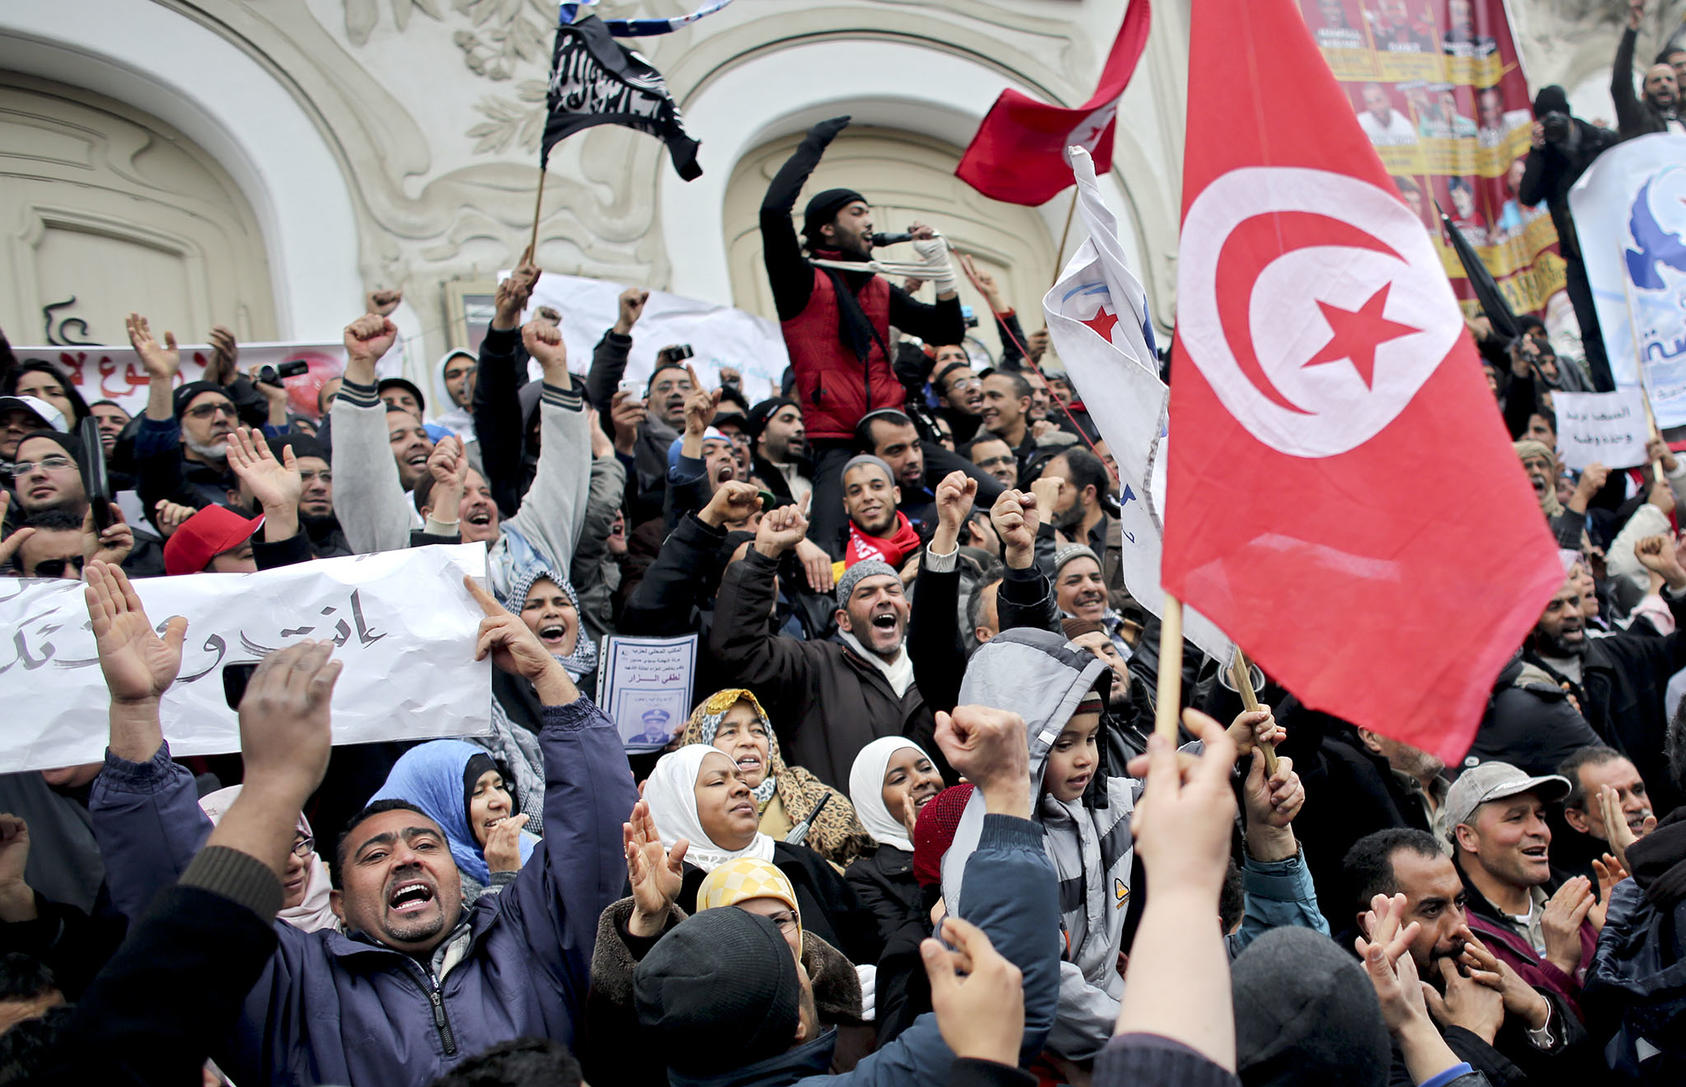 People demonstrate in support of Ennahda, Tunisia’s largest Islamist party, which led a governing coalition, in Tunis, Tunisia, Feb. 9, 2013. (Tara Todras-Whitehill/The New York Times)